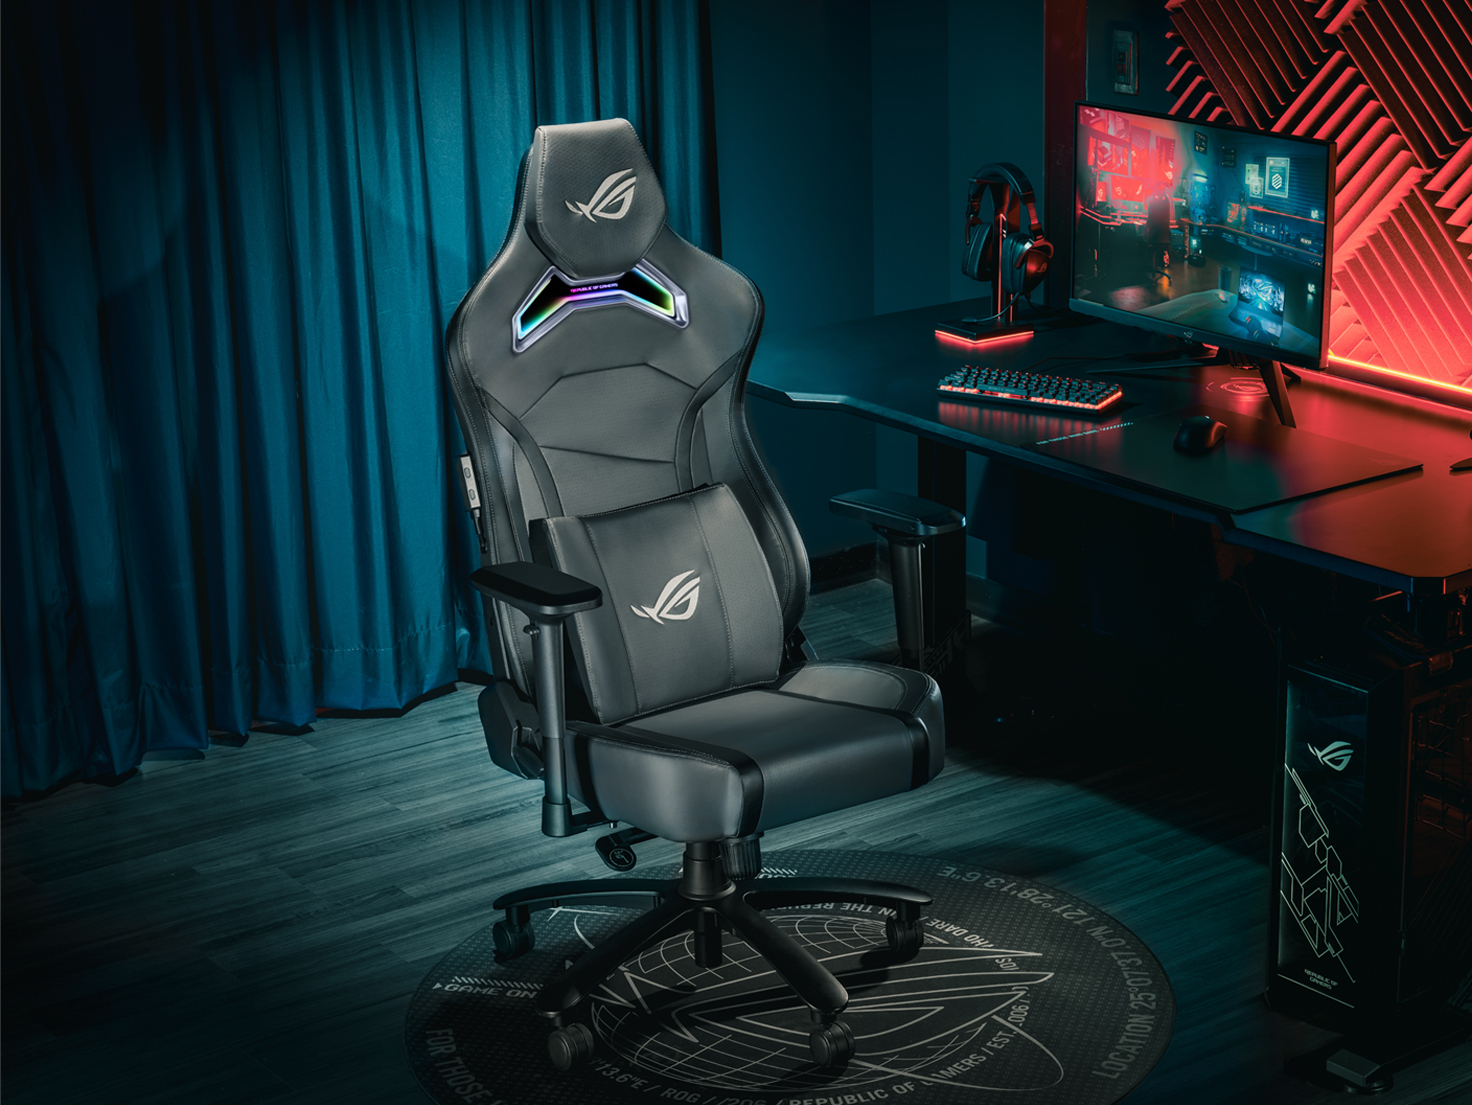 ROG Chariot X gaming chair front view to the right in a gaming room setting